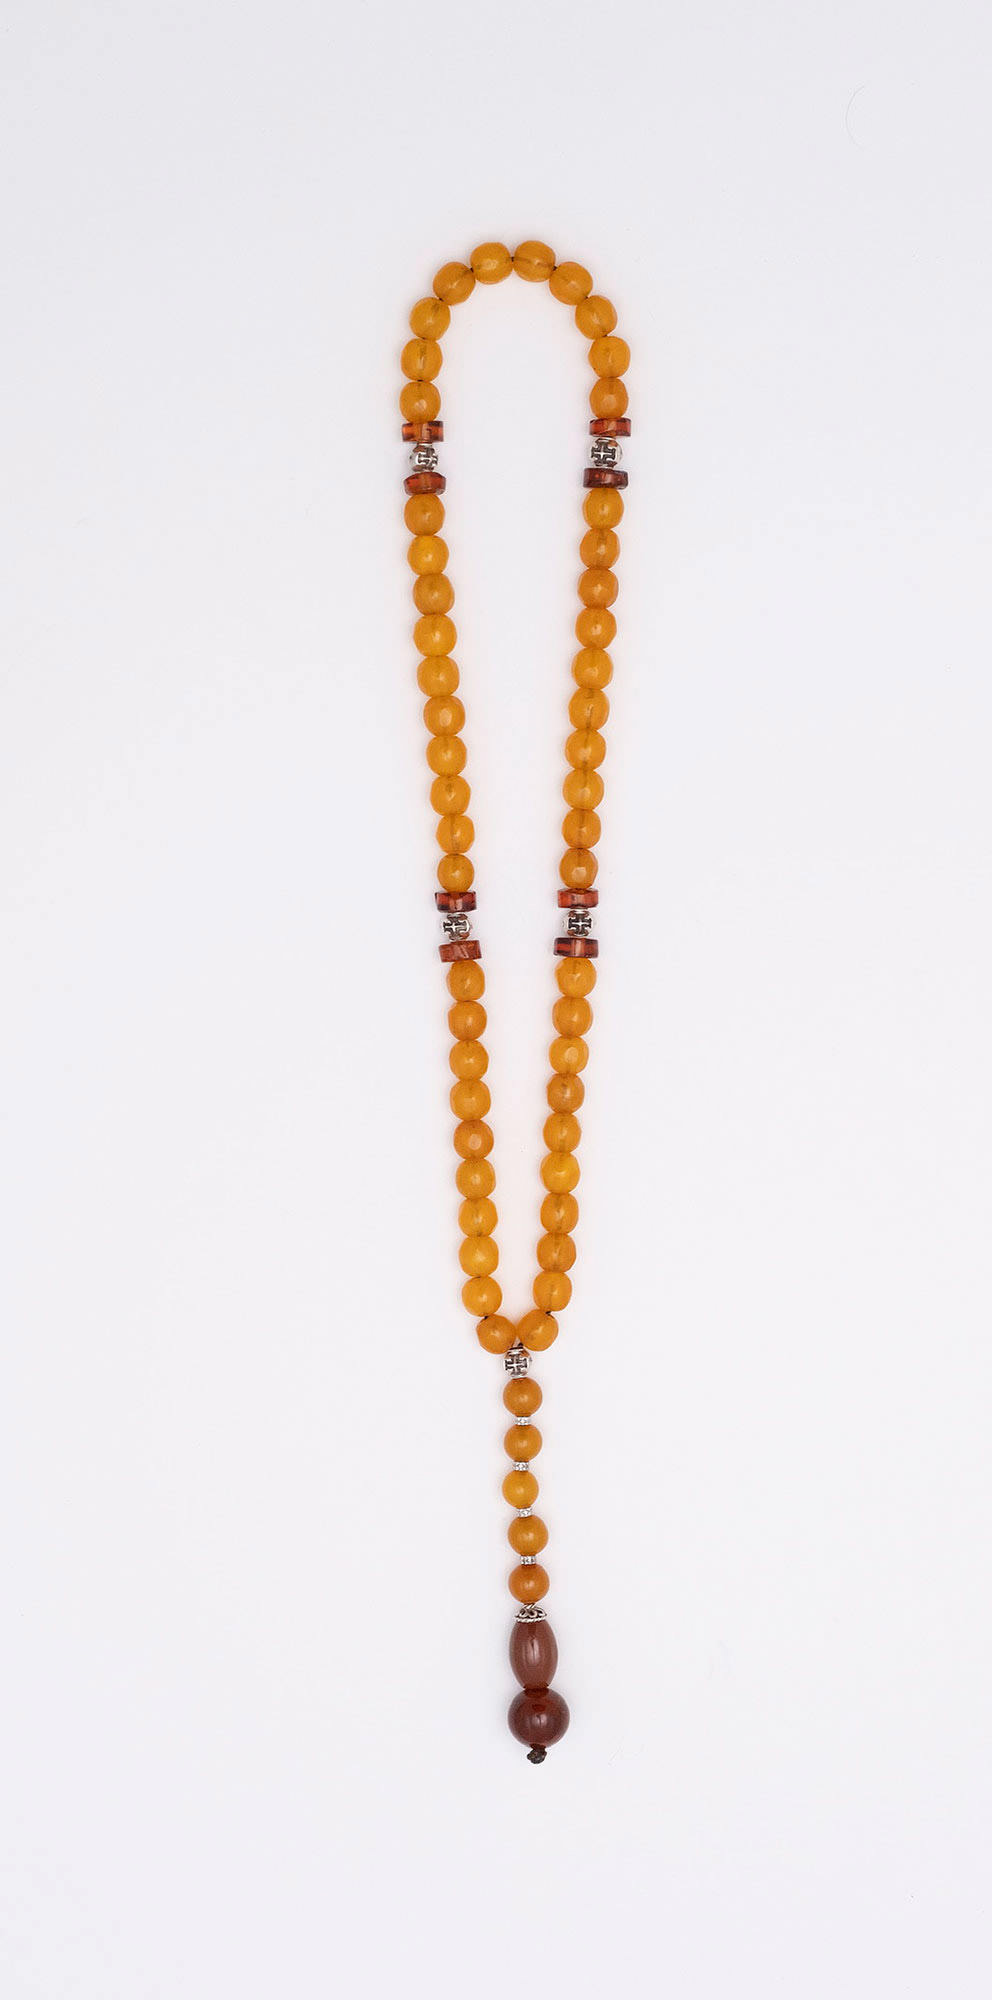 Catholic Prayer beads (Rozary) made of old mixture of artificial resins (Egypt 1960), Amber from Baltic Sea (Cut by hand and Ambroid) and Tin.